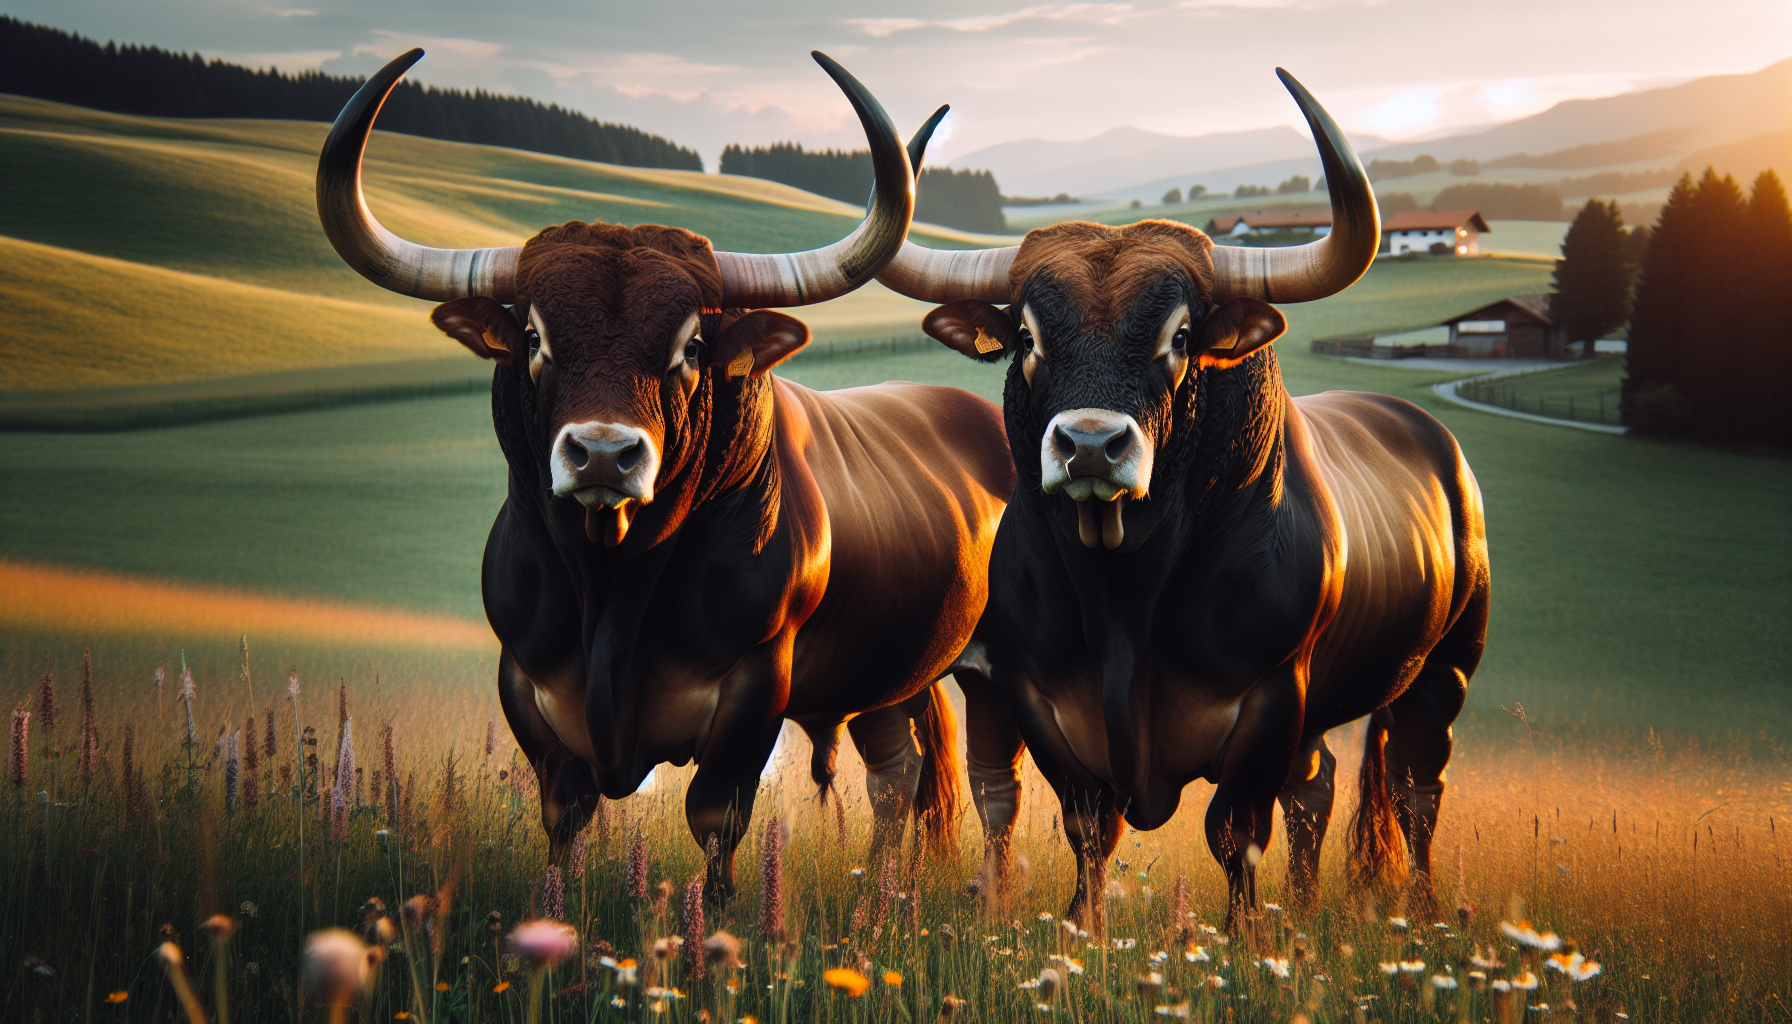 Illustration of domesticated oxen